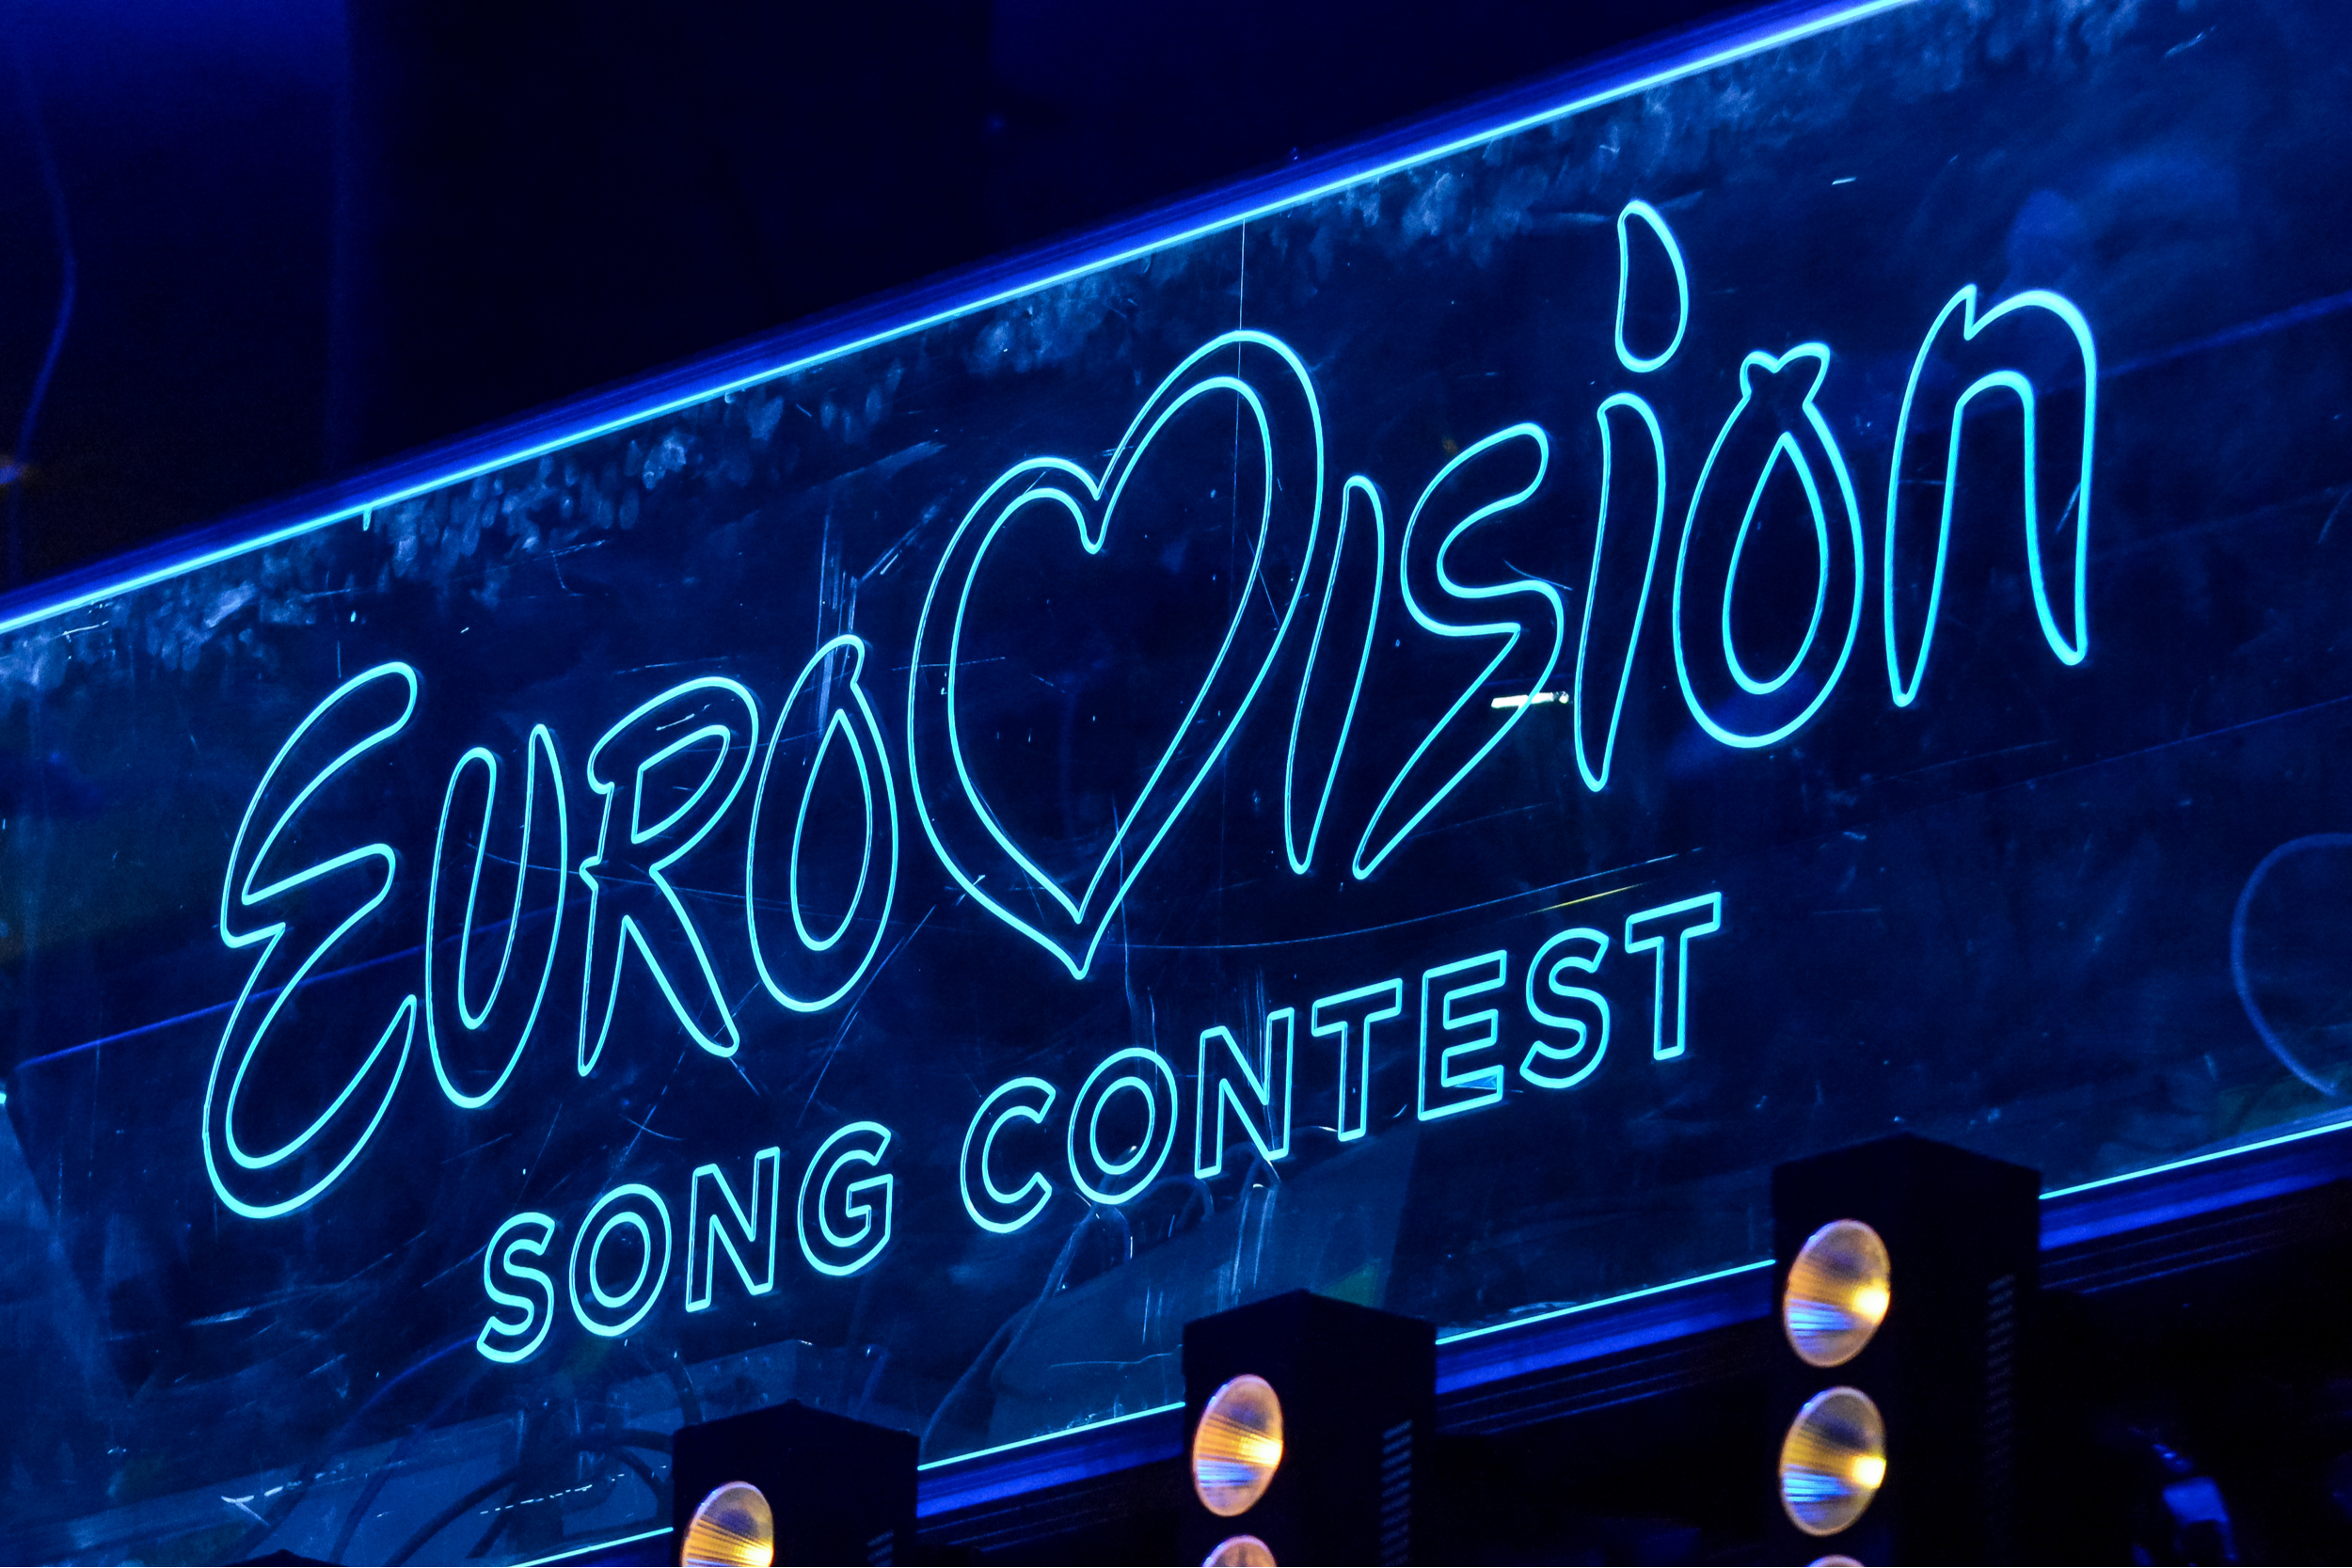 A sign for the Eurovision song contest.